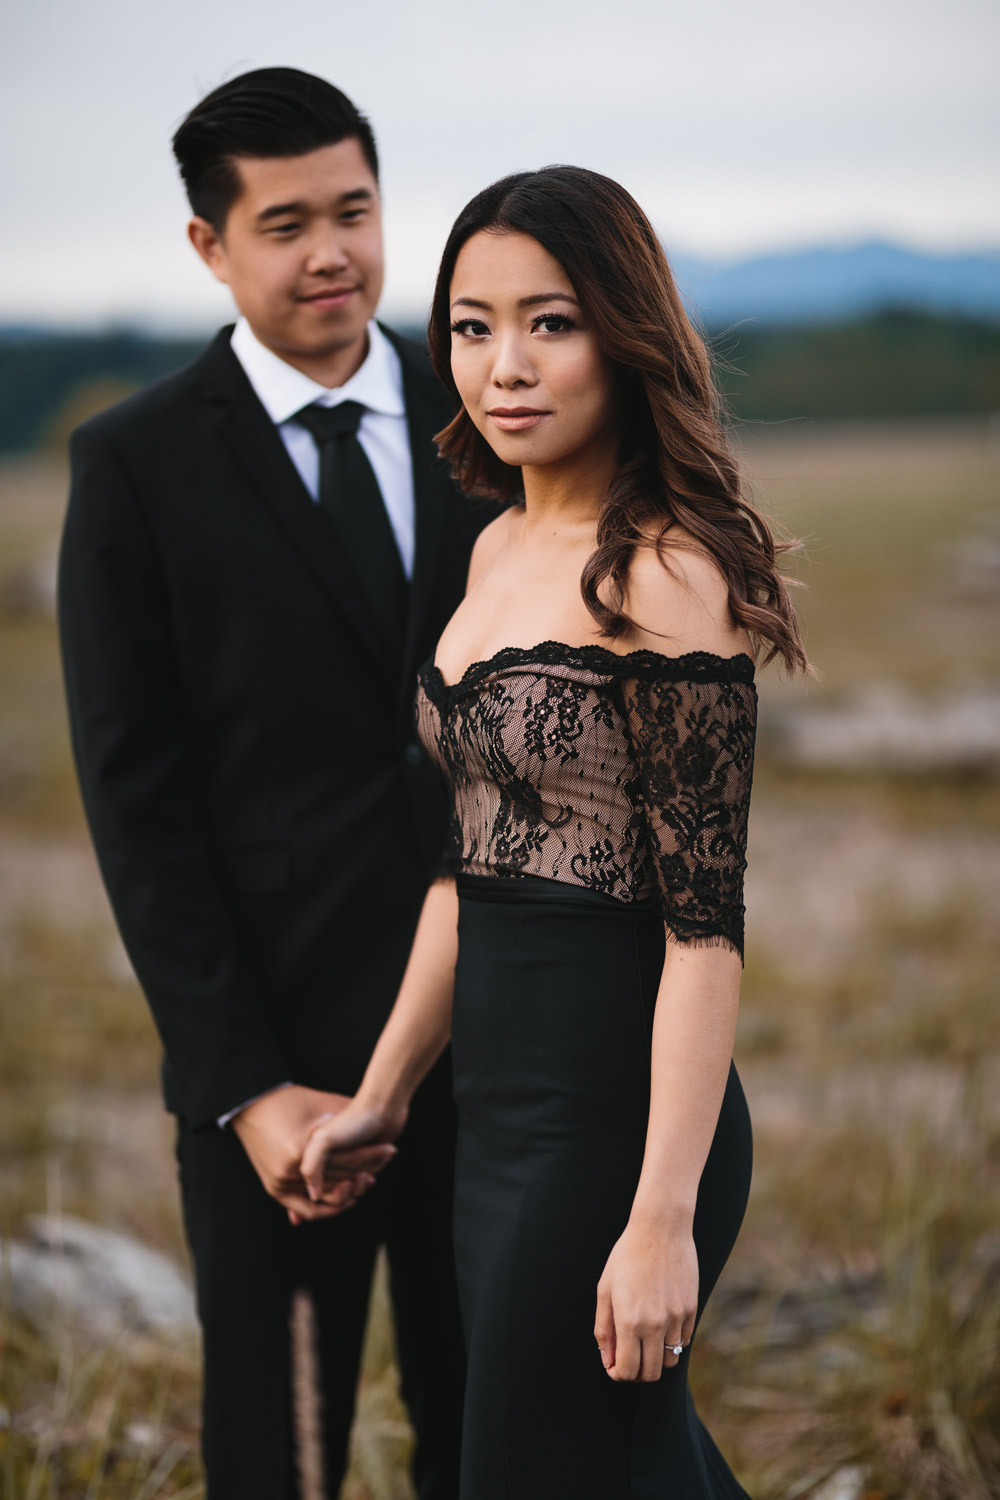 joyce and vince wedding engagement photography in richmond bc at iona beach park